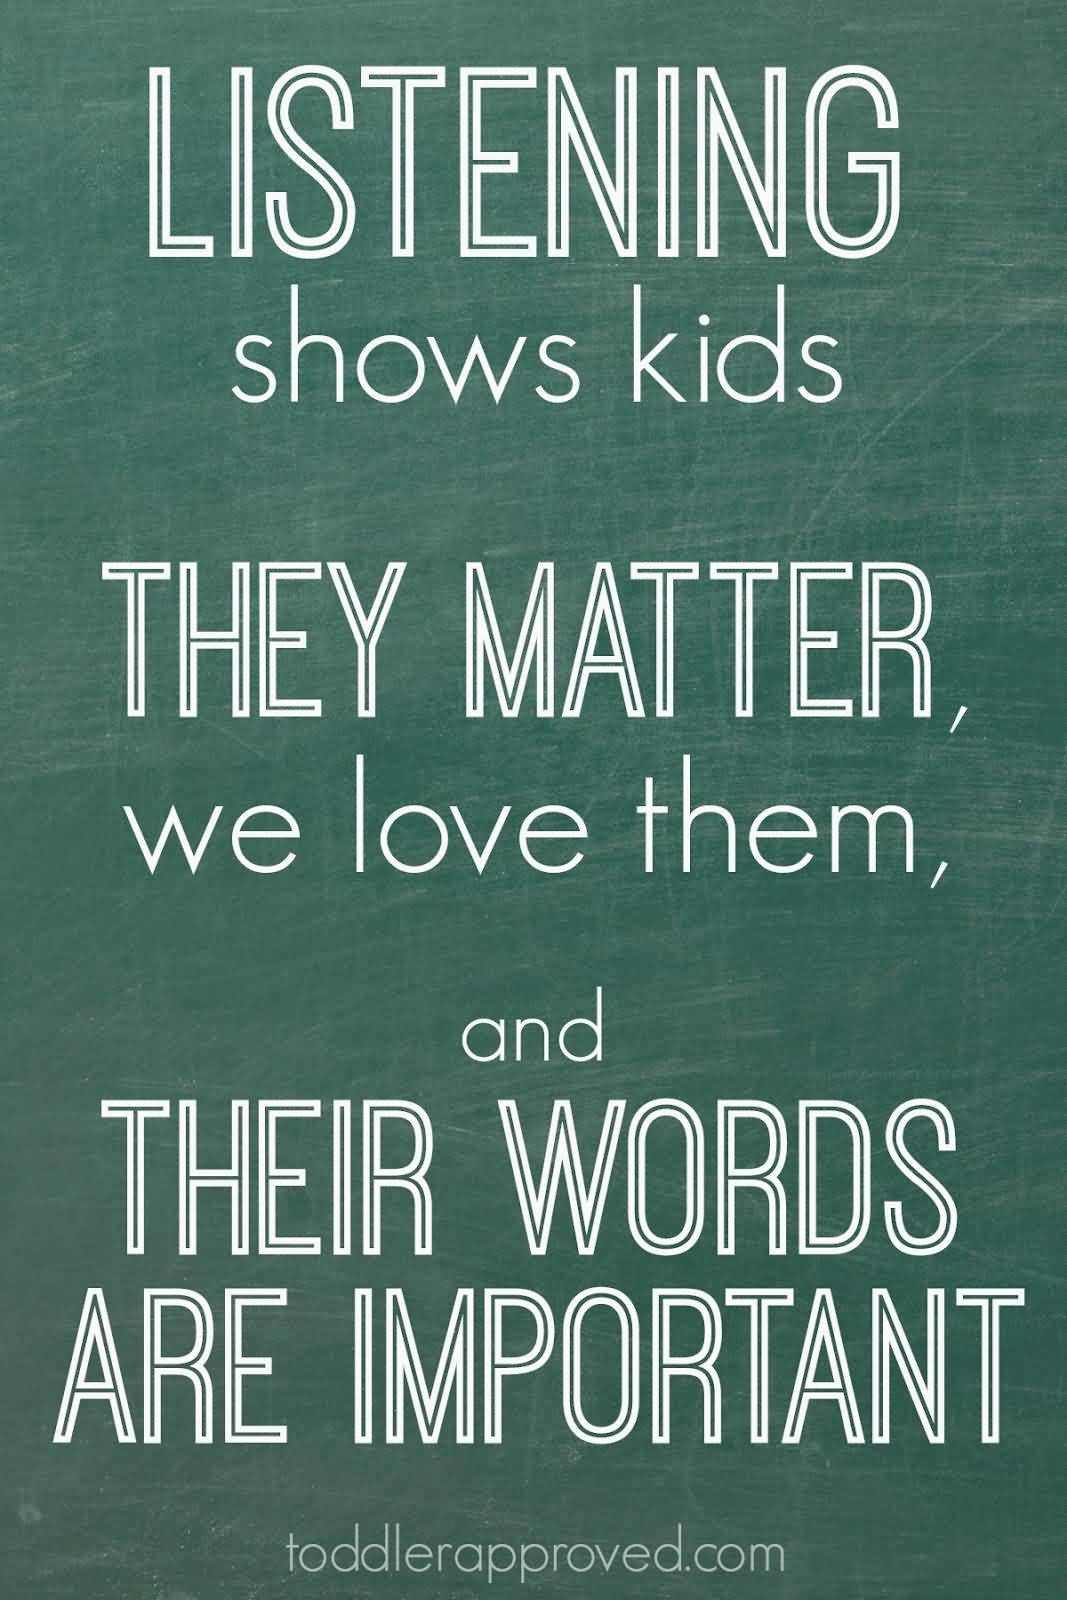 Listening shows kids they matter, we love them, and their words are important